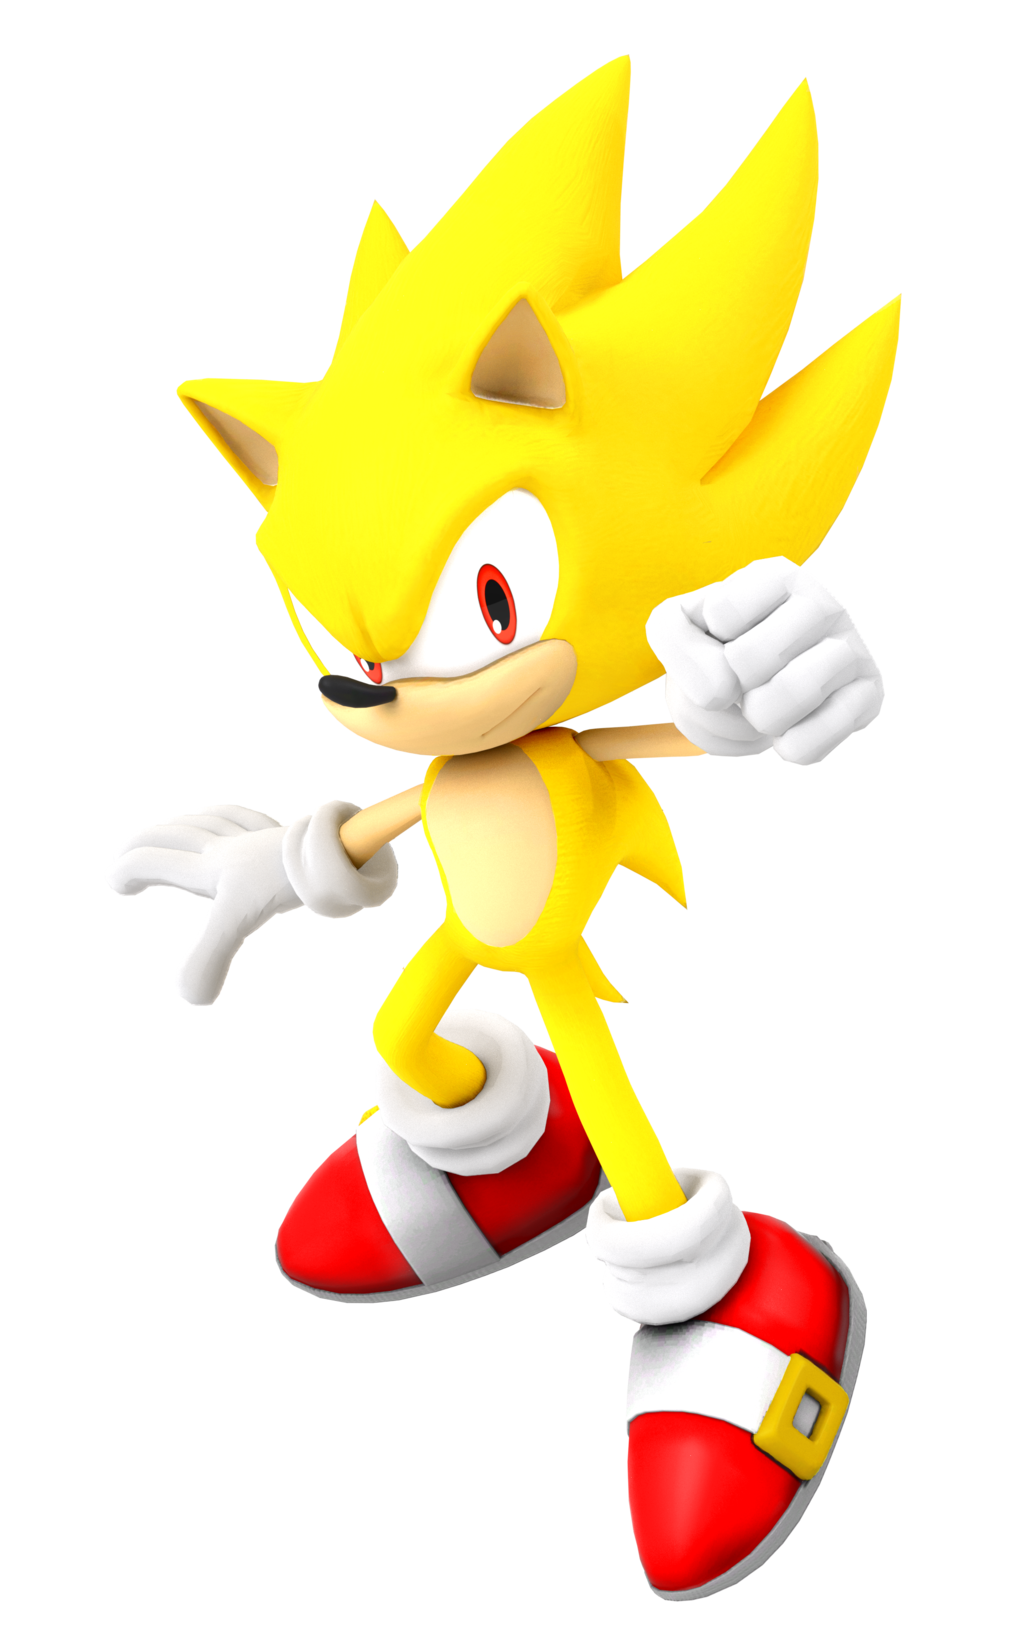 Download Sonic Toy Wallpaper Computer Forces The Super Hq Png Image Freepngimg